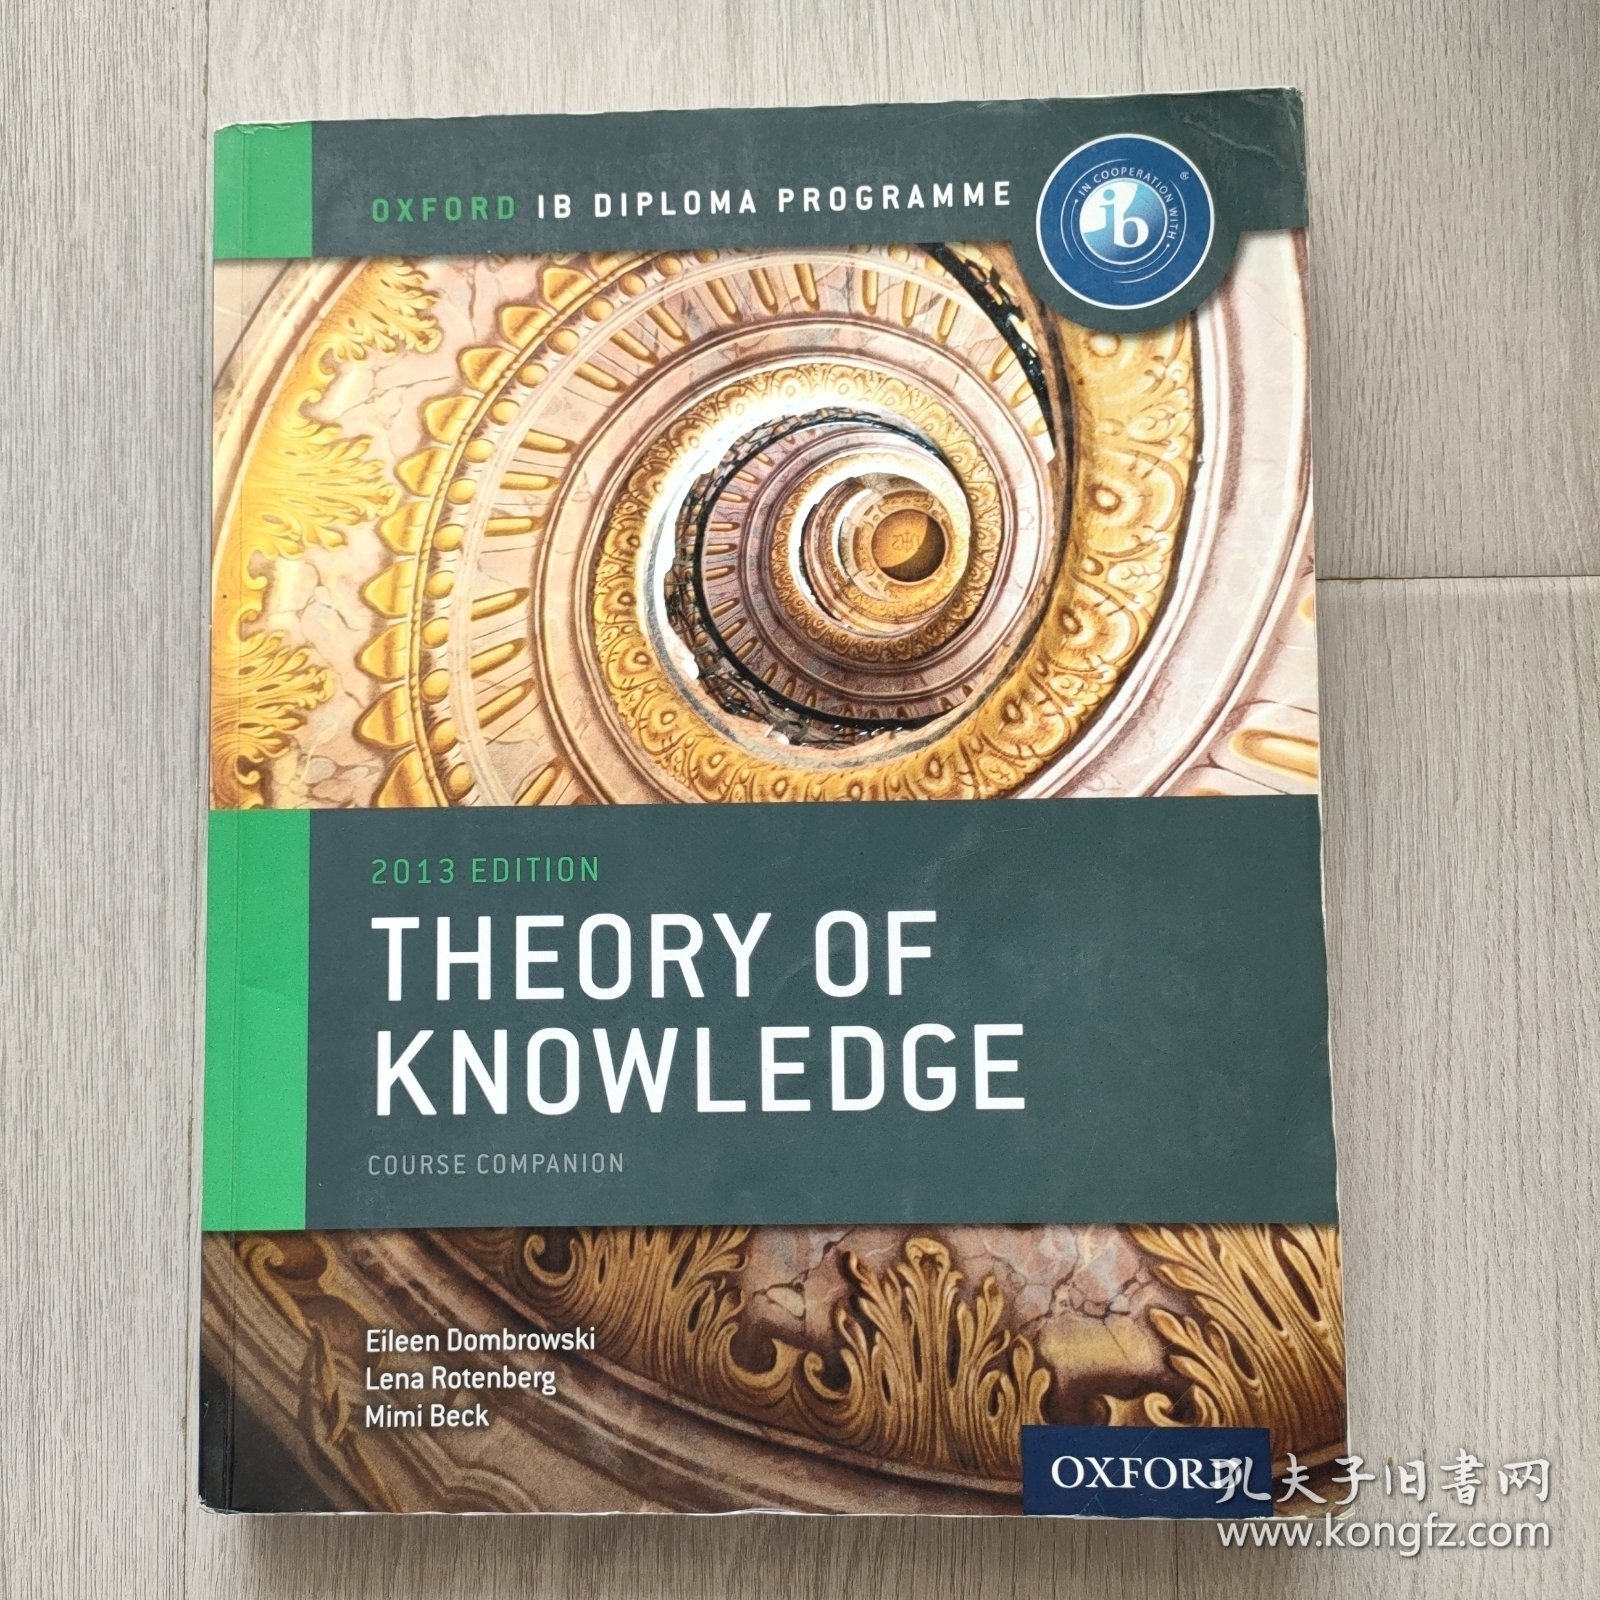 Oxford IB Diploma Programme: Theory of Knowledge Course Companion【正版 实拍图发货】